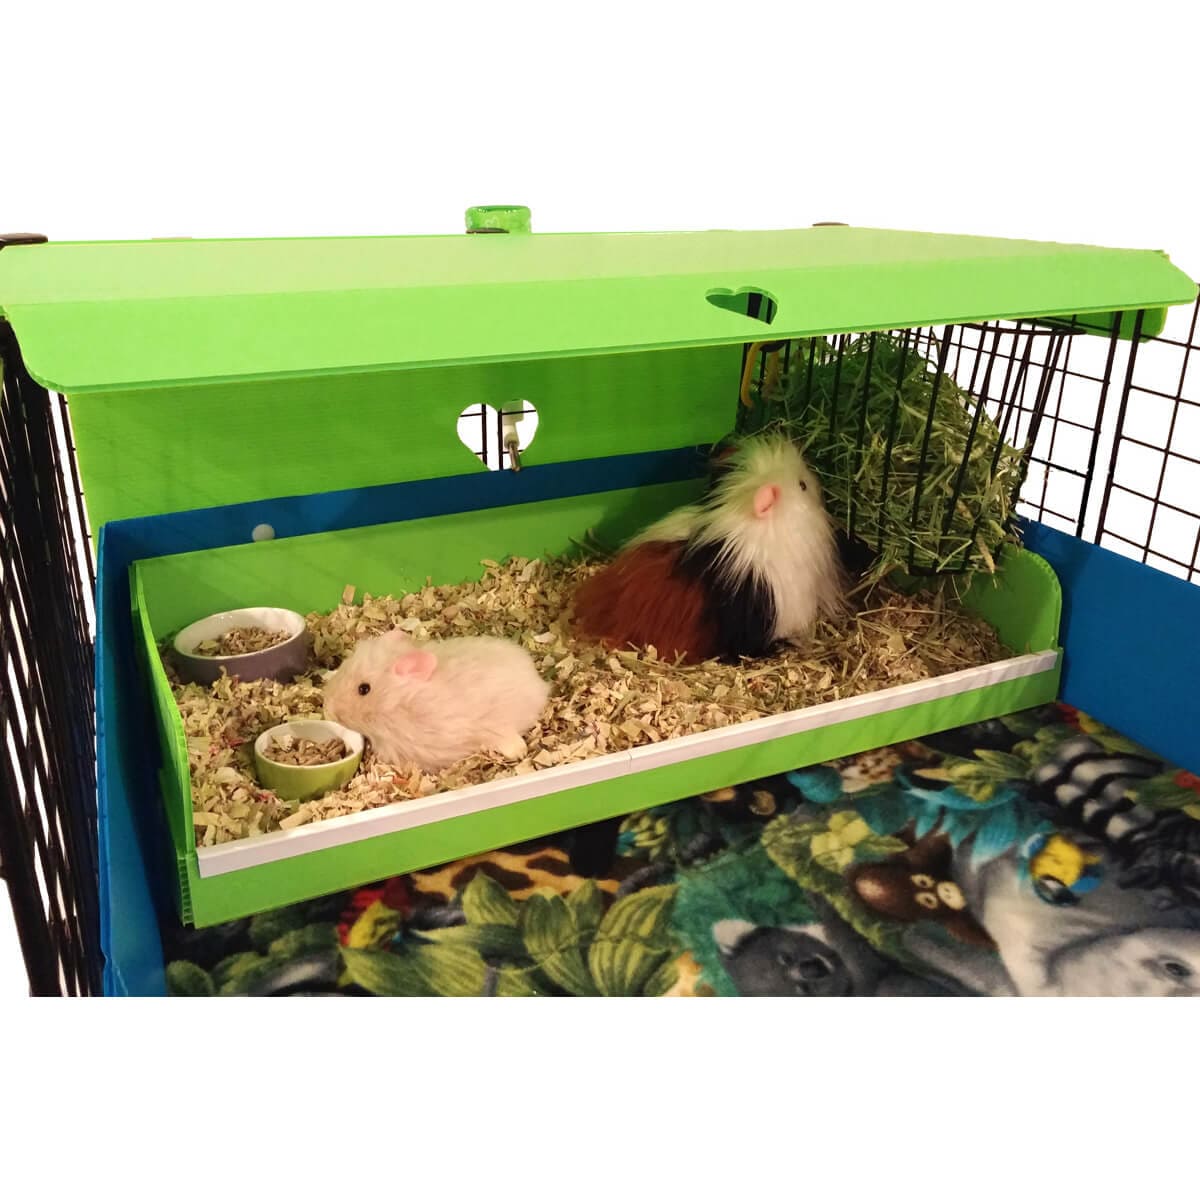 Two Guinea pigs in a colorful Kitchen suite in a light blue C&C guinea pig cage